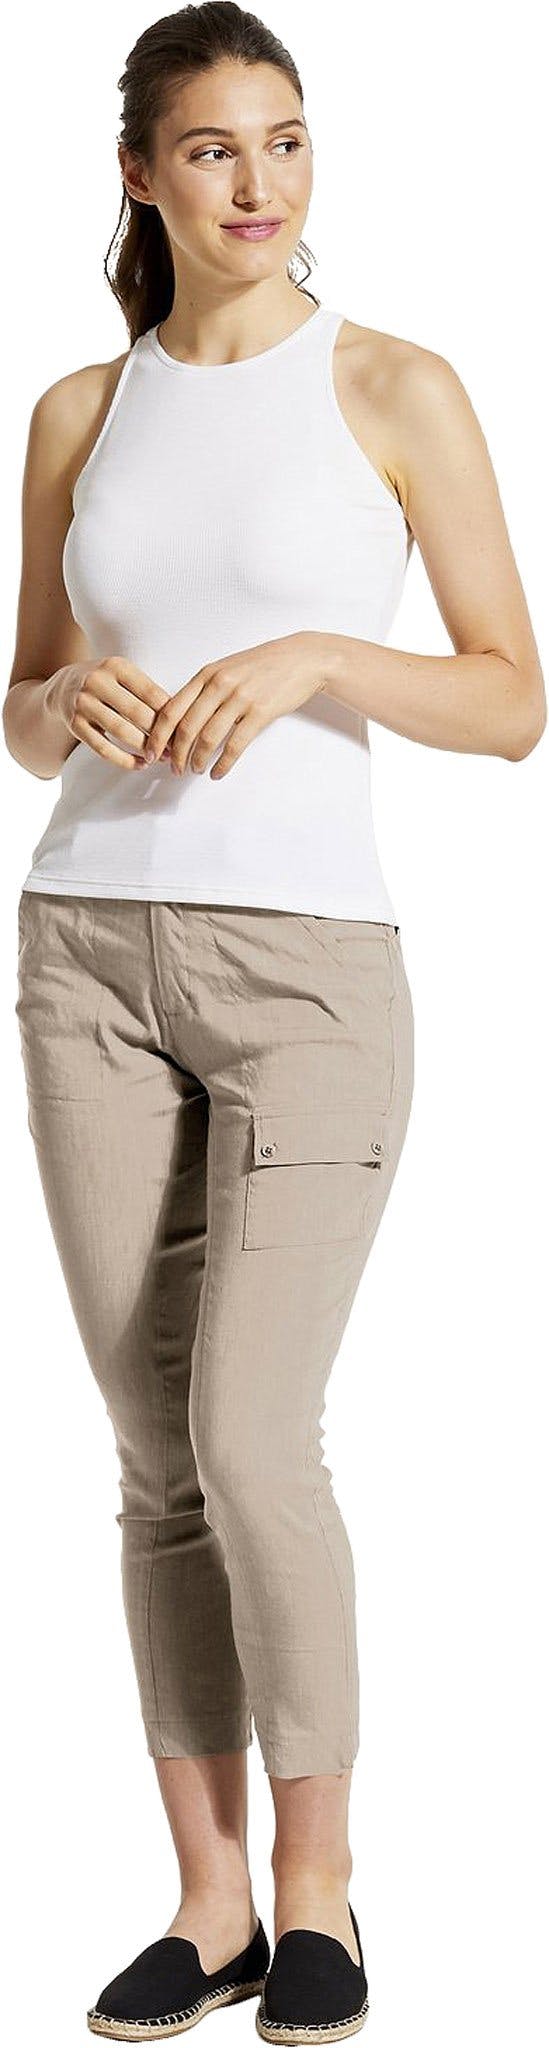 Product image for MAT Pants - Women's